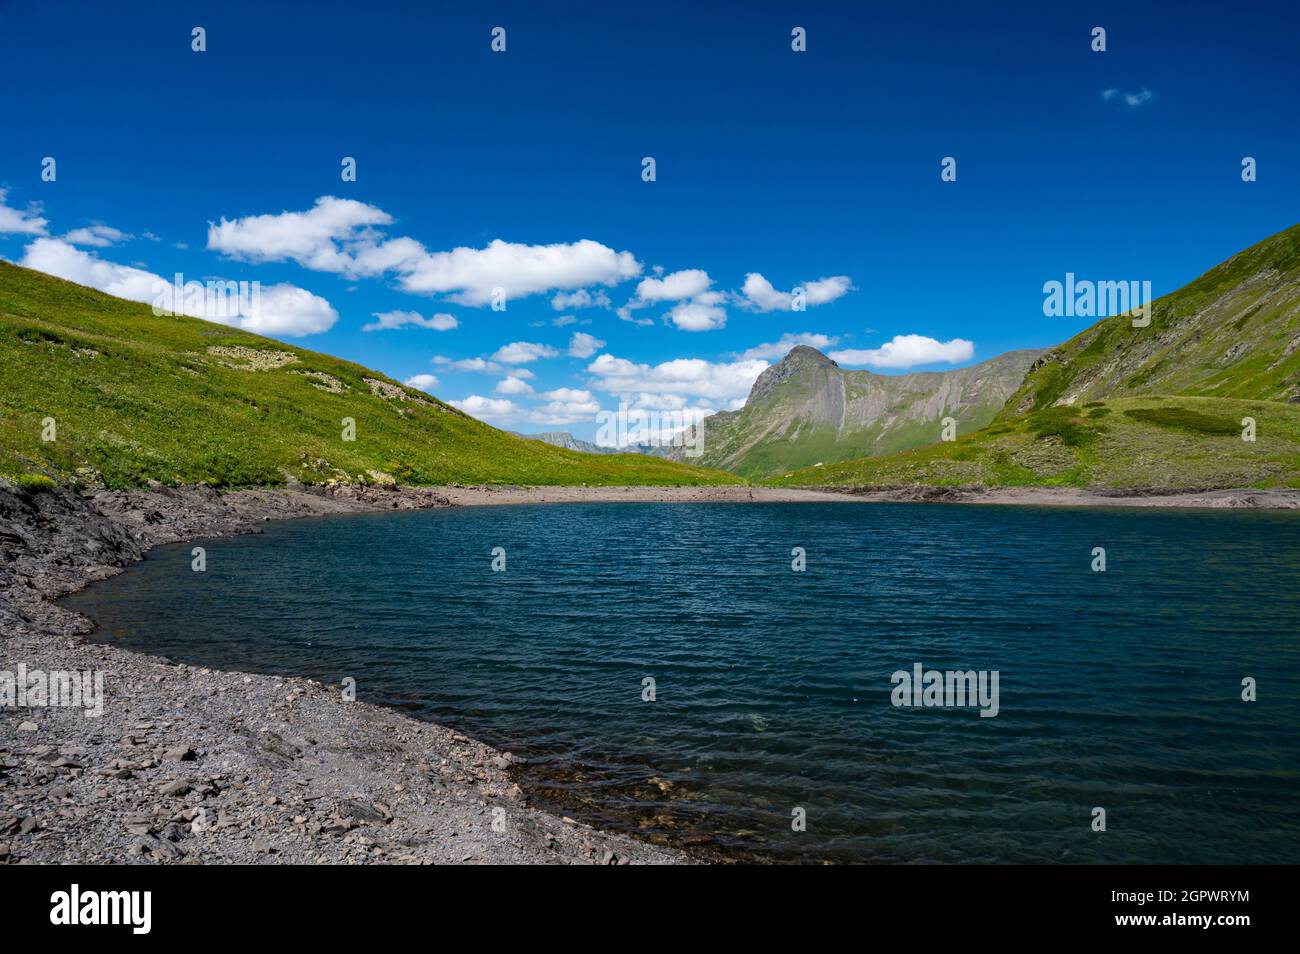 Scenic View Of Lake And Mountains Against Blue Sky Stock Photo